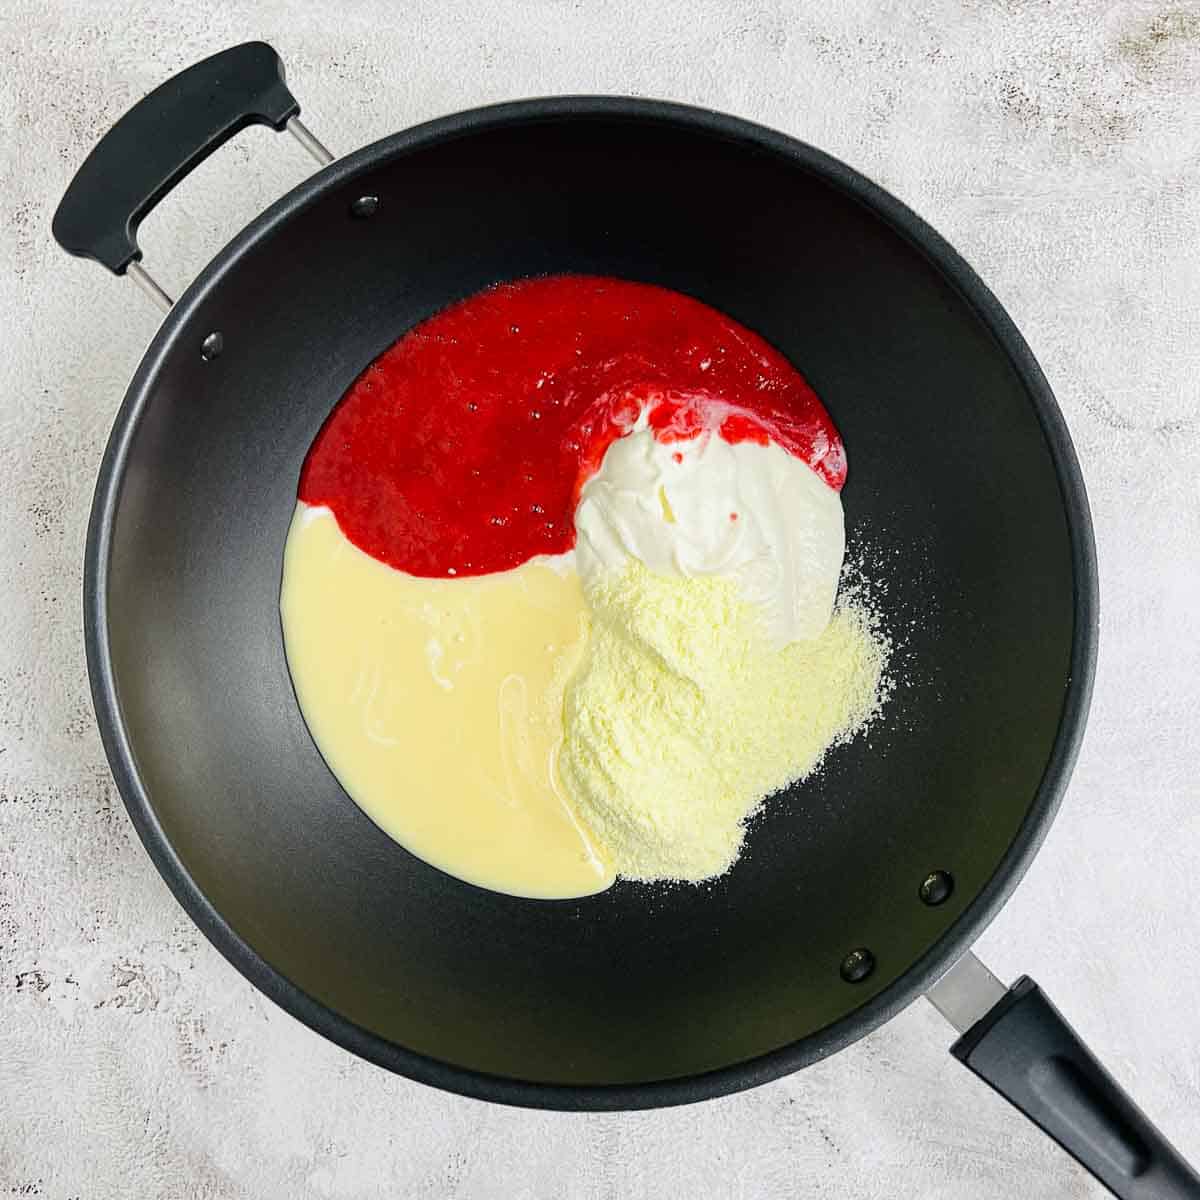 Raspberry puree, condensed milk, milk powder, and ricotta cheese placed in a non-stick pan.